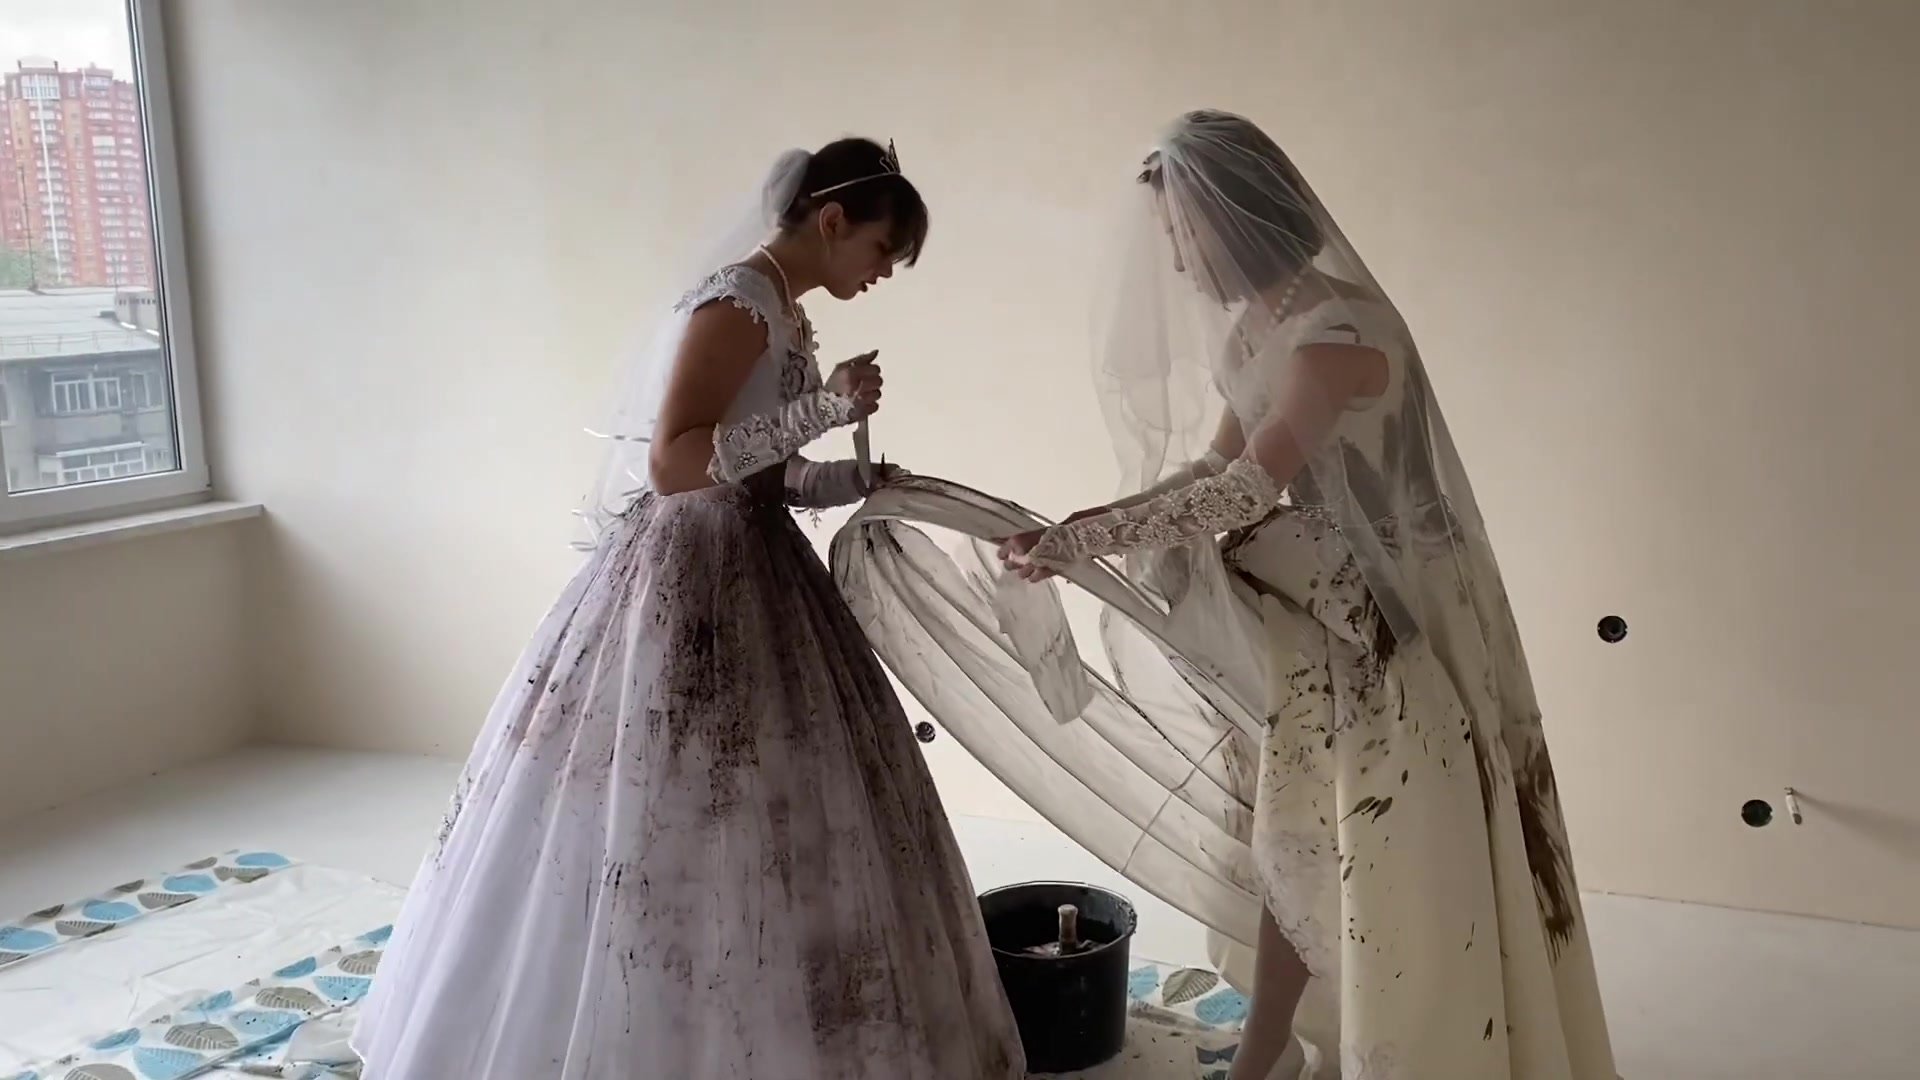 Marriage Dress - Wet and messy: girls destroying their weddingâ€¦ ThisVid.com